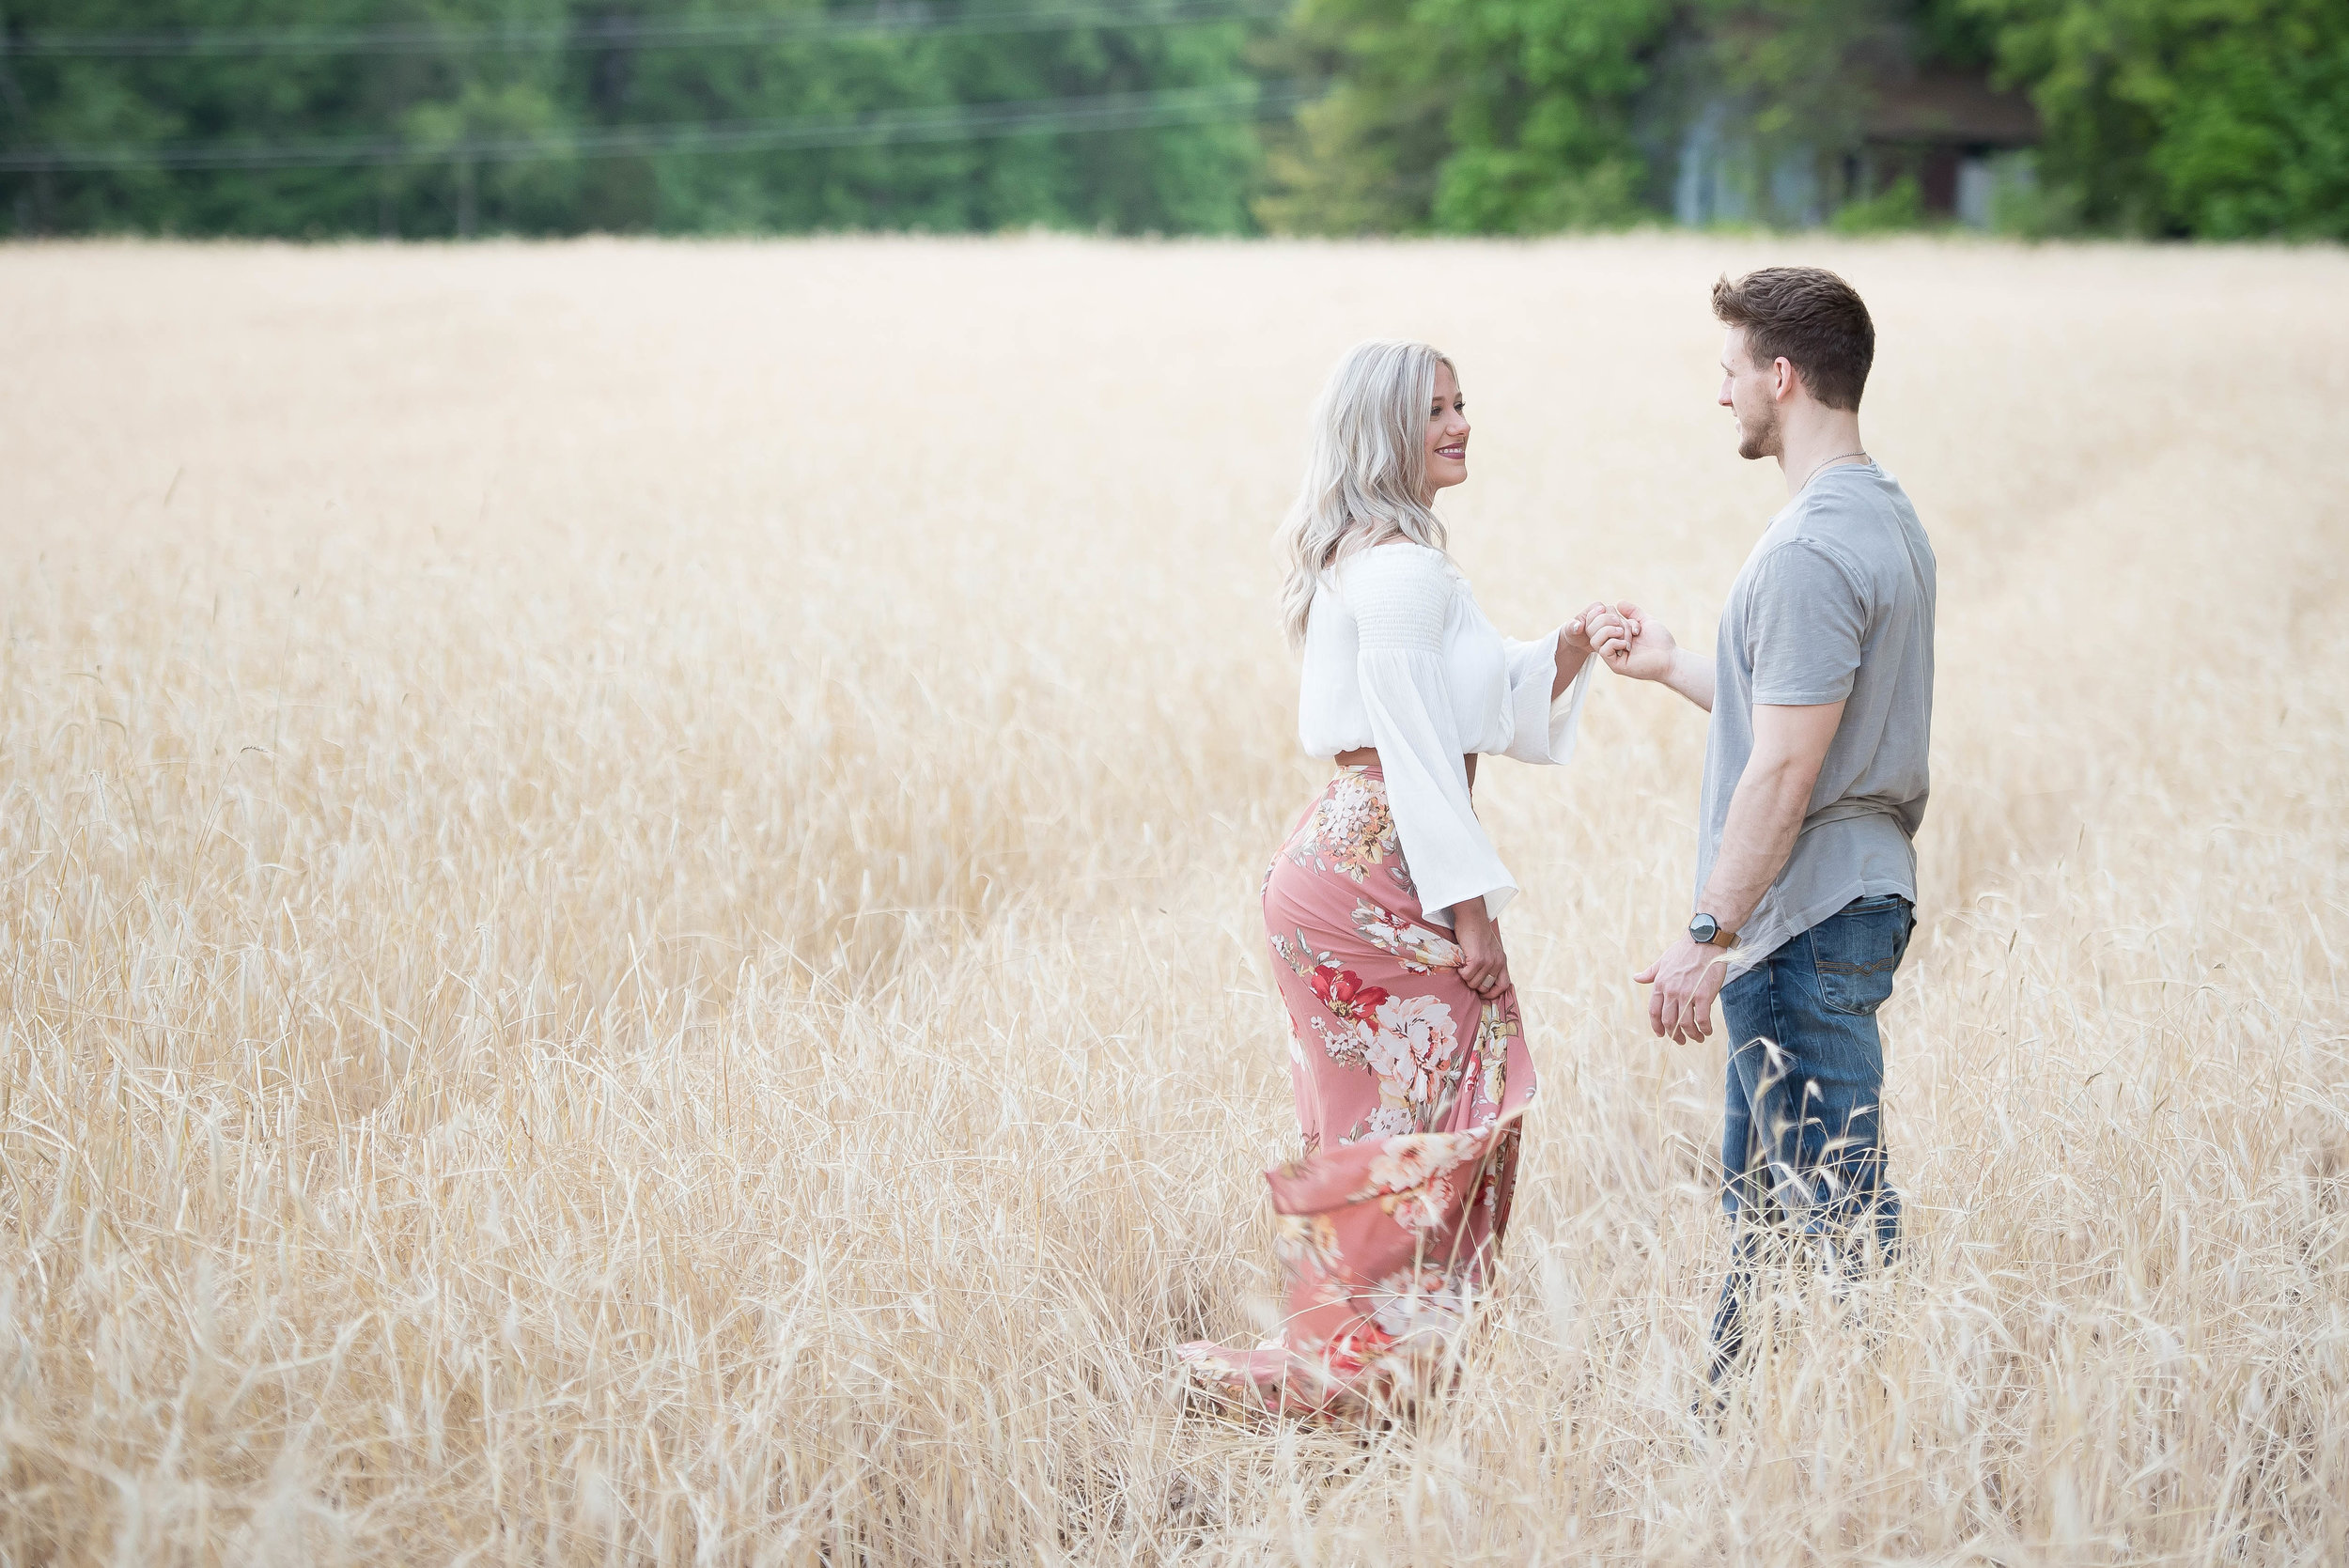 Couple Session - Fitness Couples - Tall Grass Field - Engagement Portrait Ideas - Engagement Session Ideas - Couple Session Ideas - Spring Picture Ideas-19.jpg